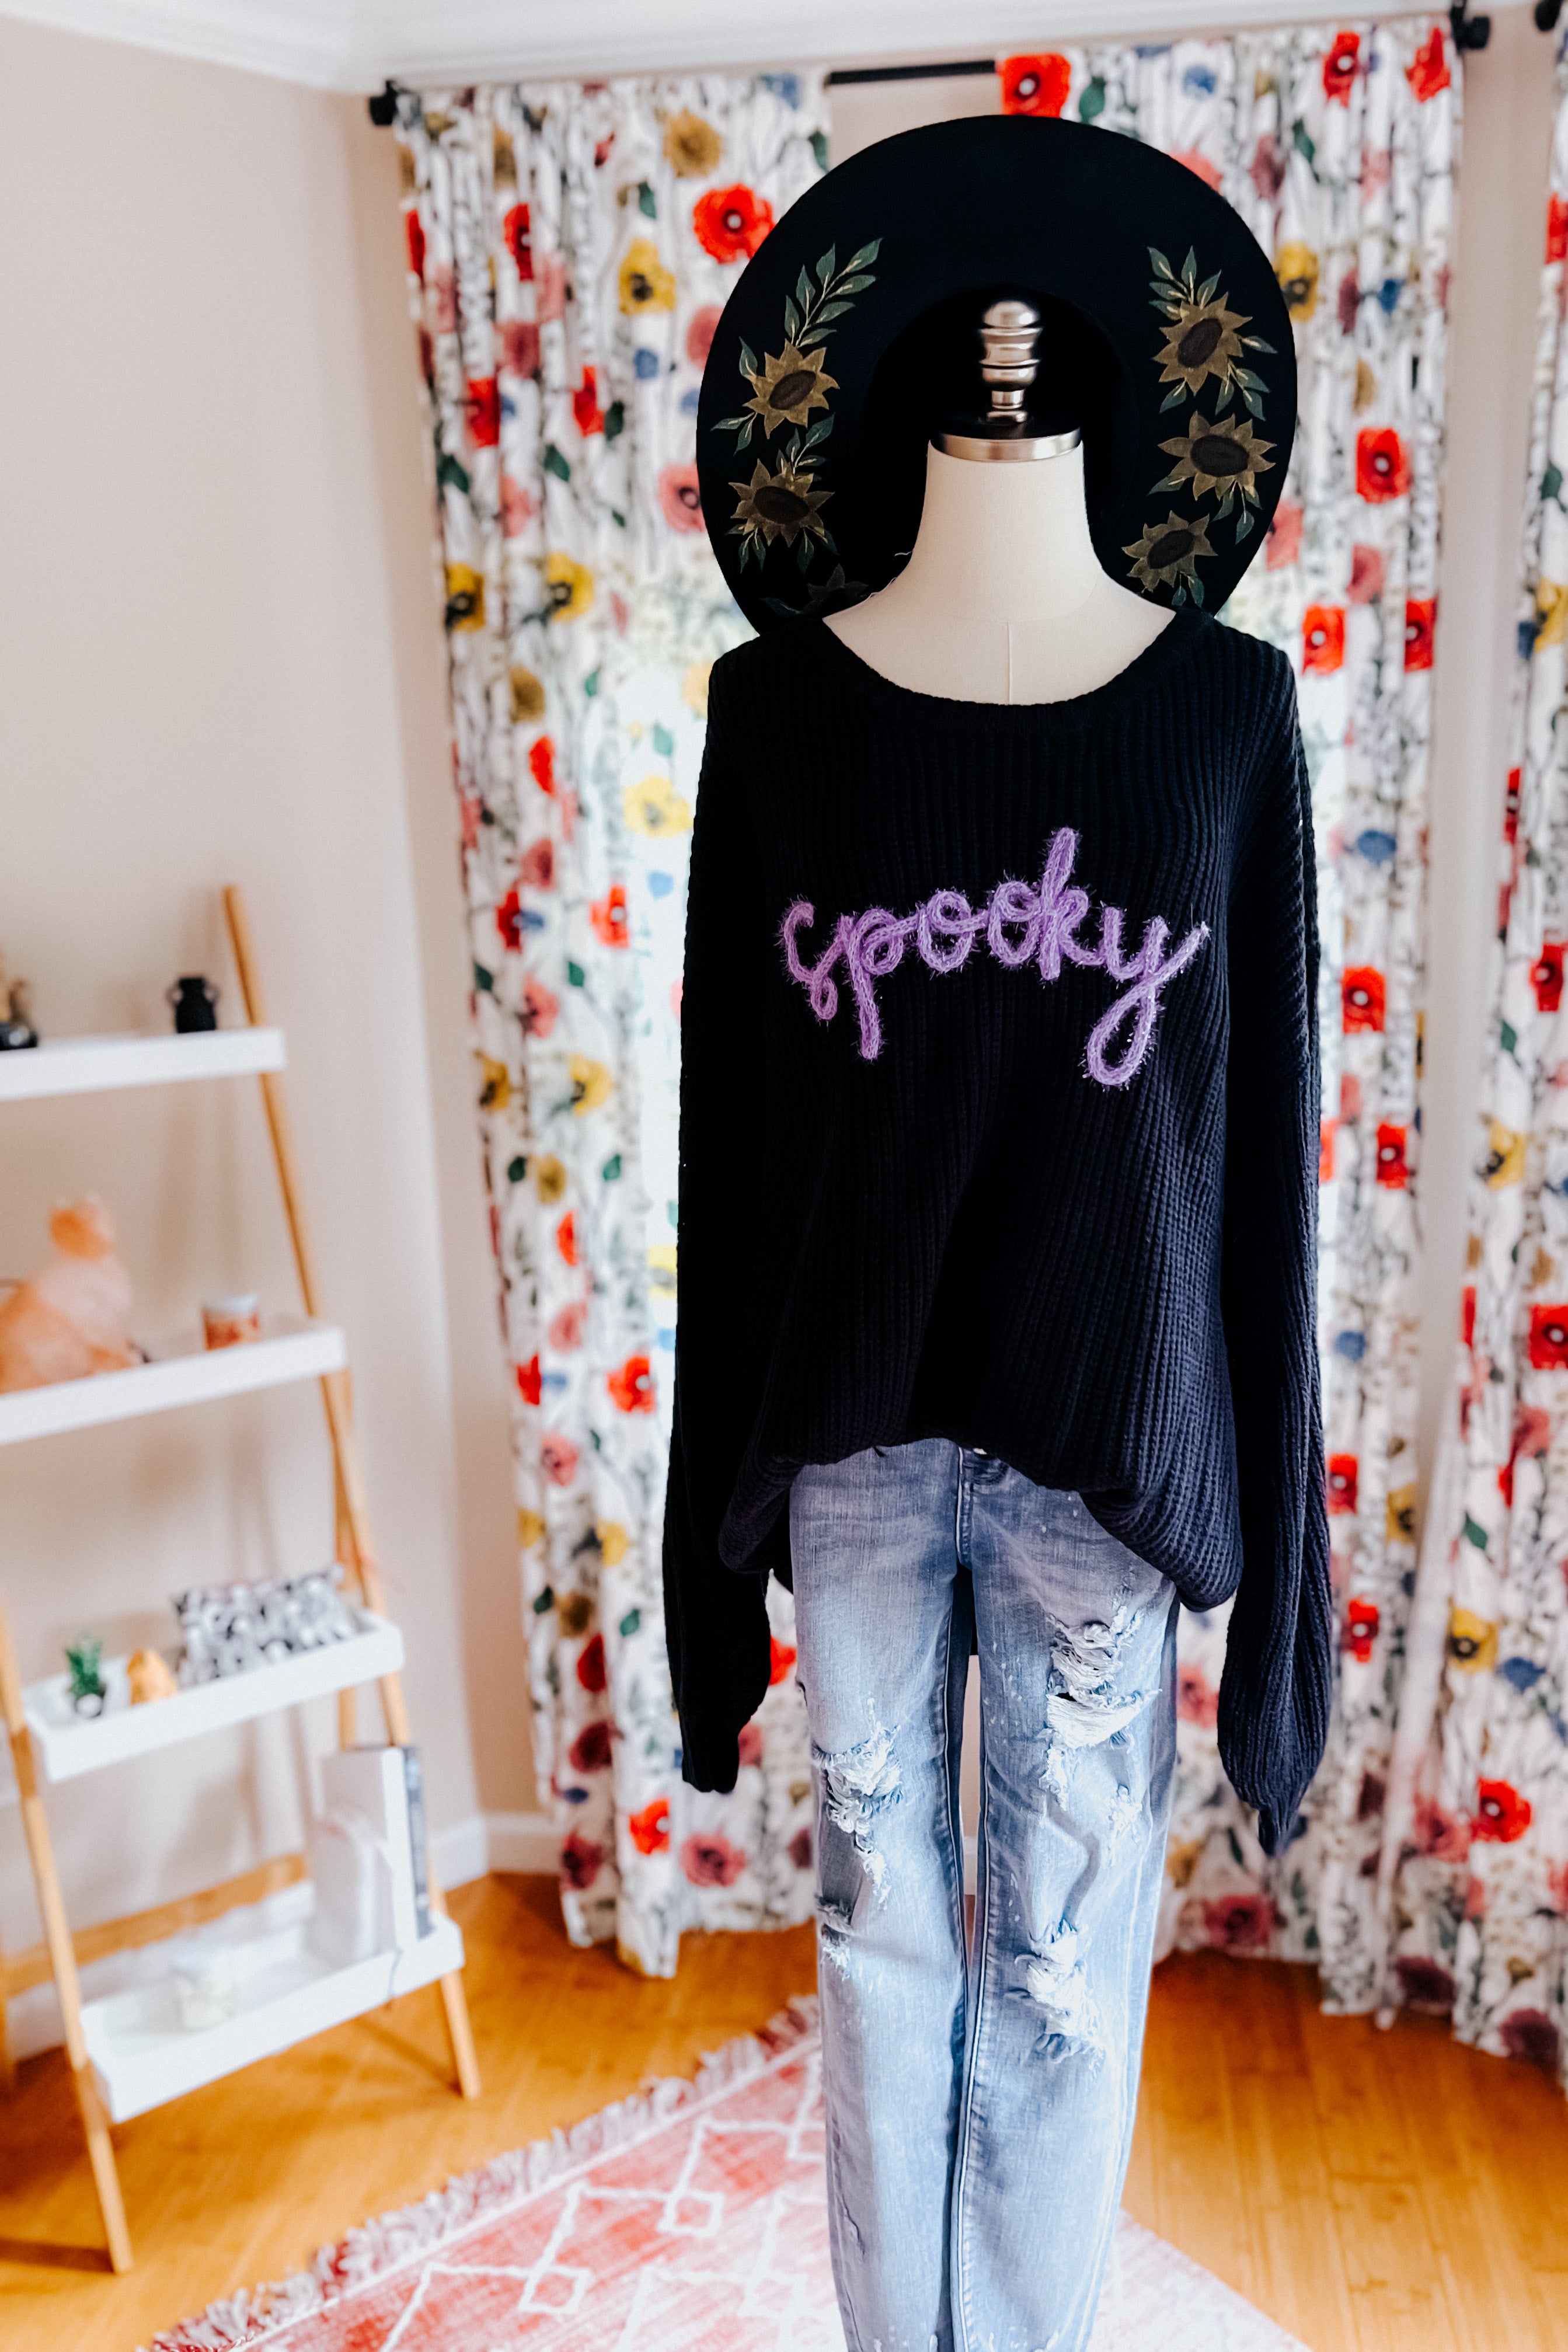 All Eyes On Me Embroidered "Spooky” Sweater